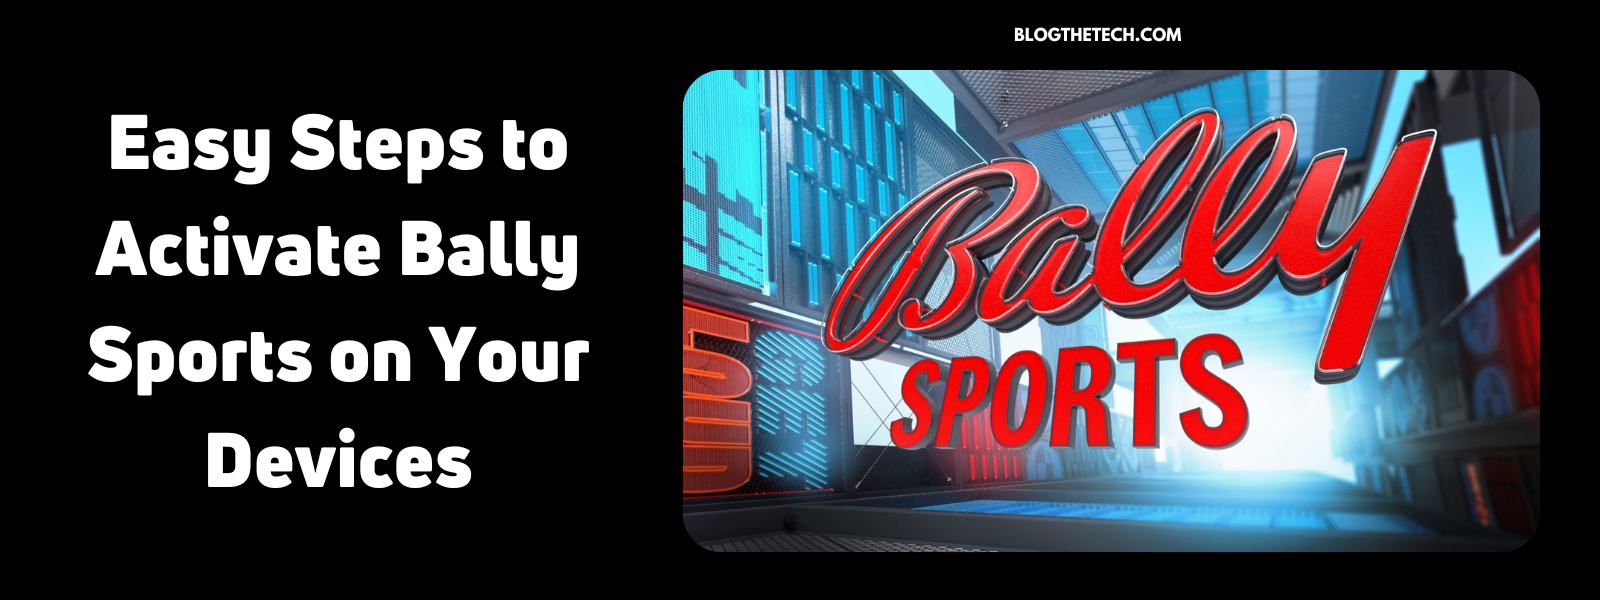 activate-bally-sports-on-your-devices-featured